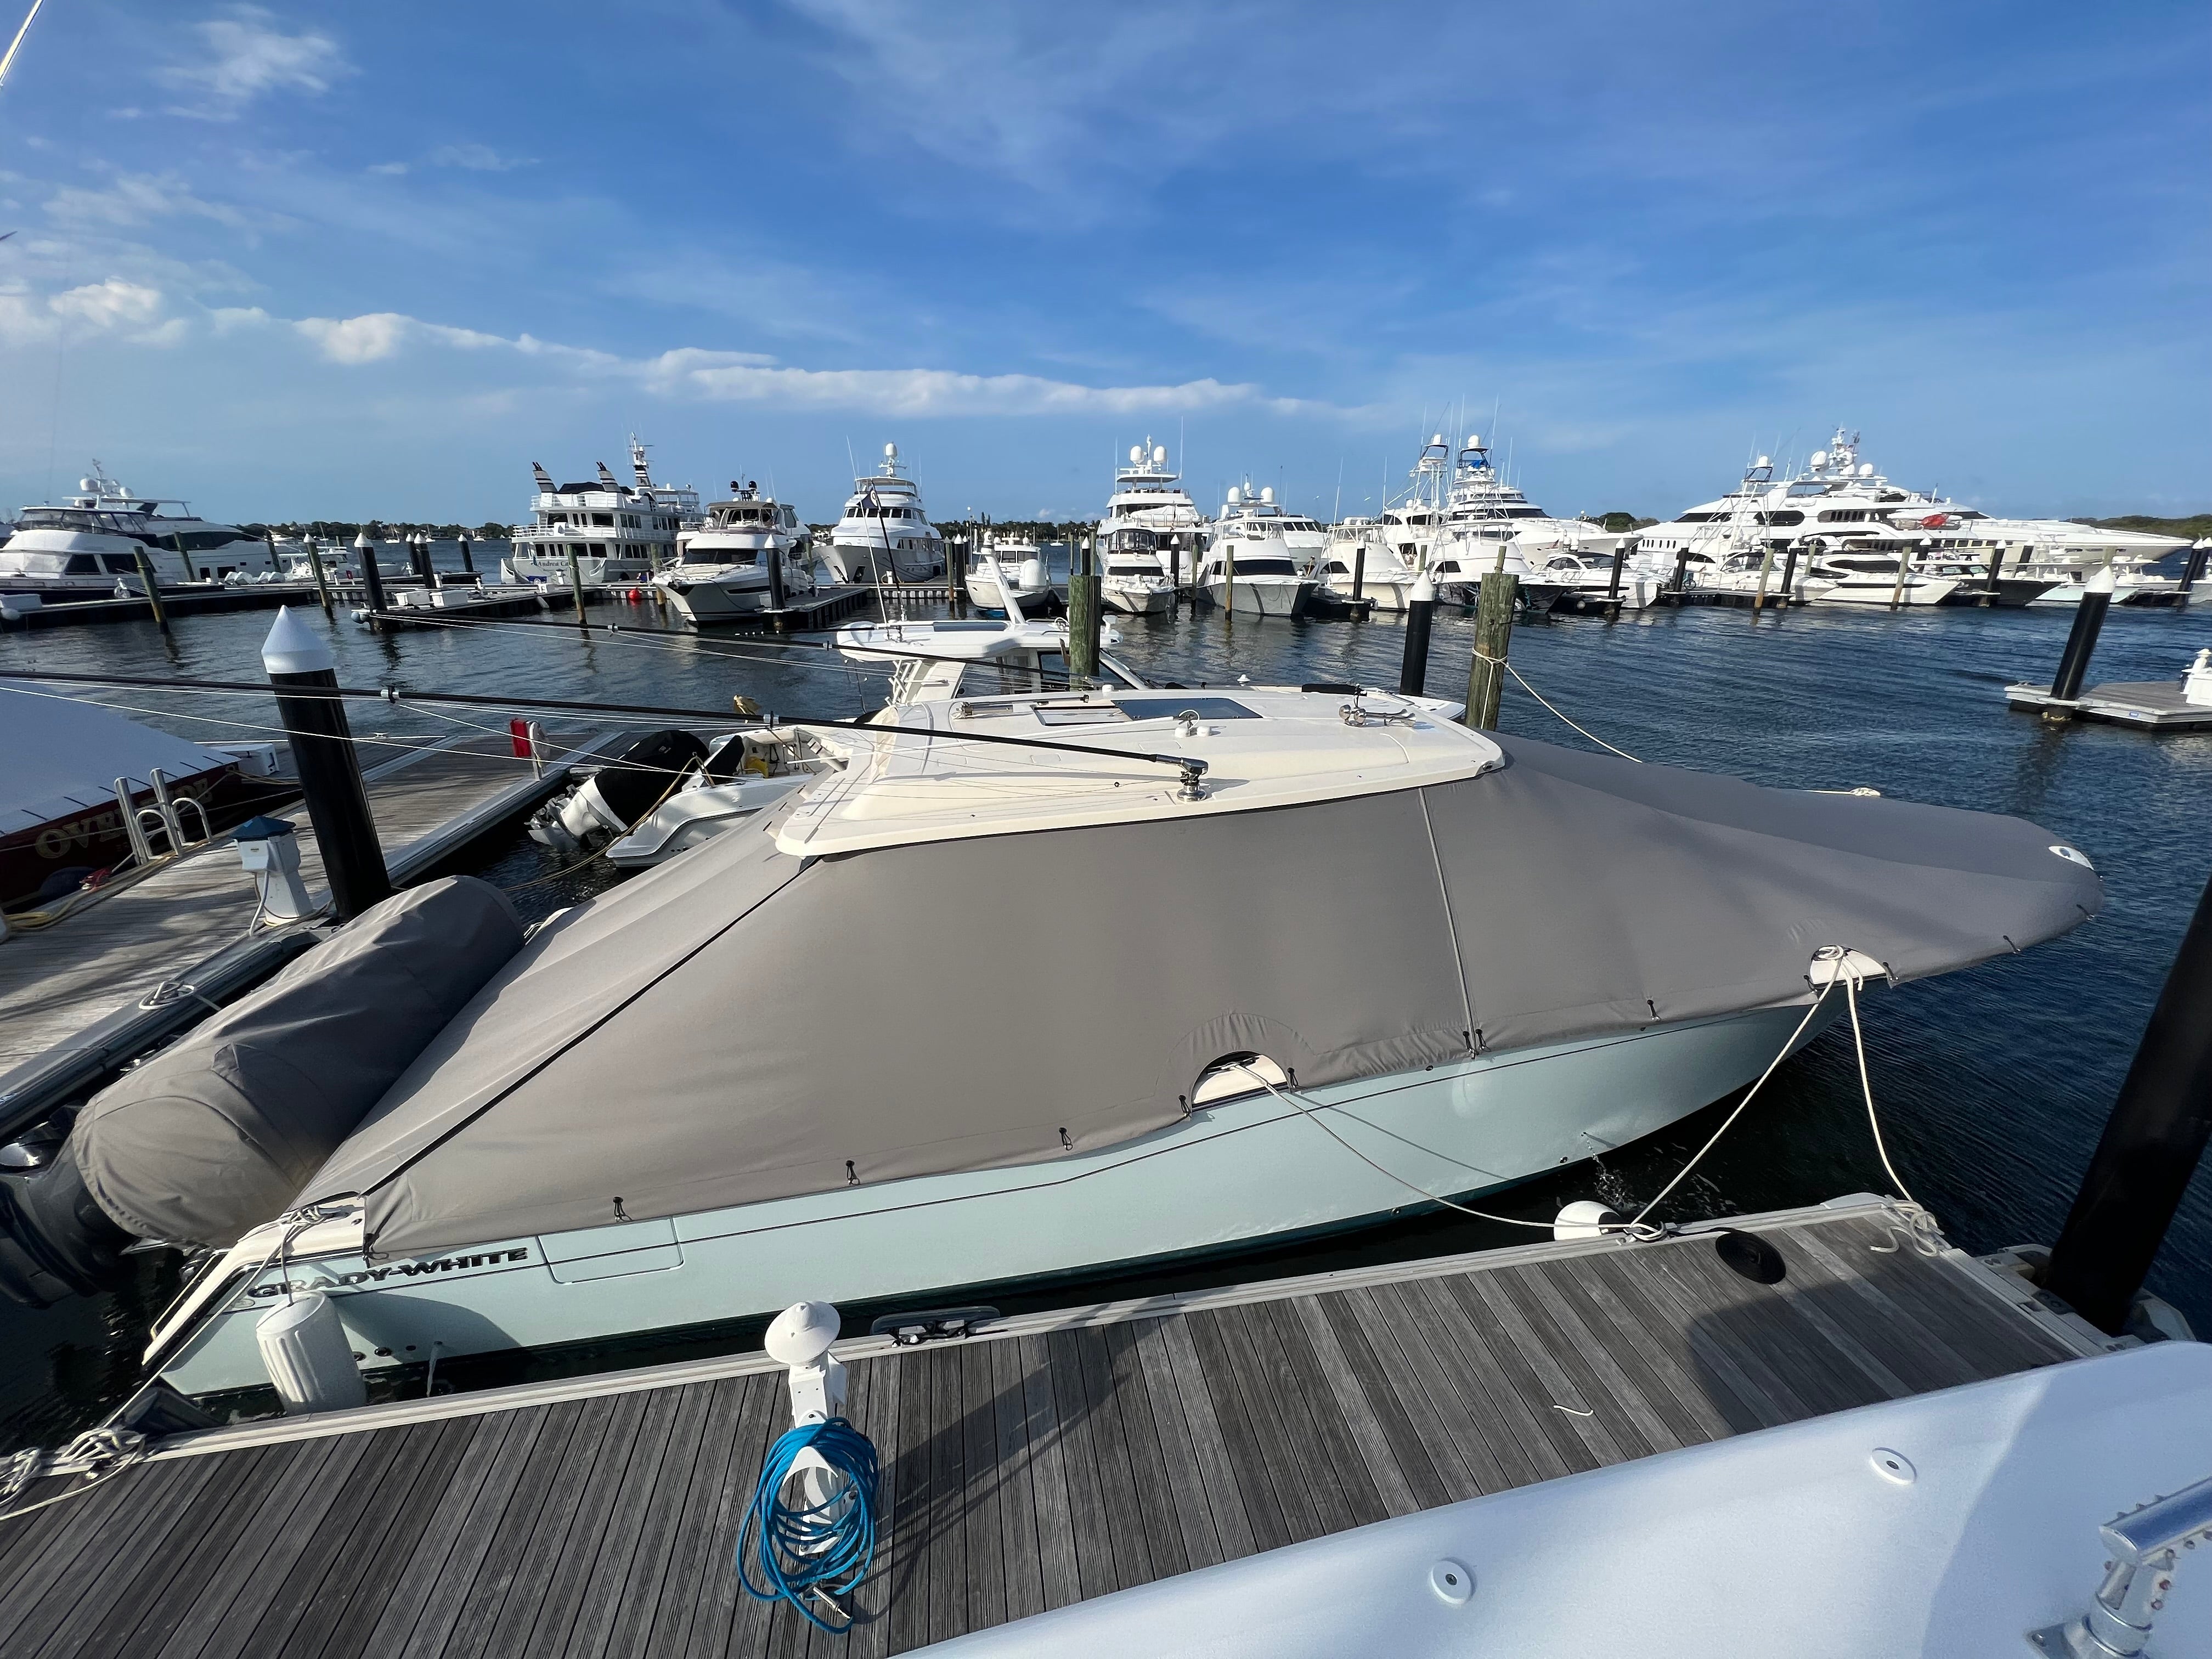 gradade pins on gray weather max boat cover yachts in back